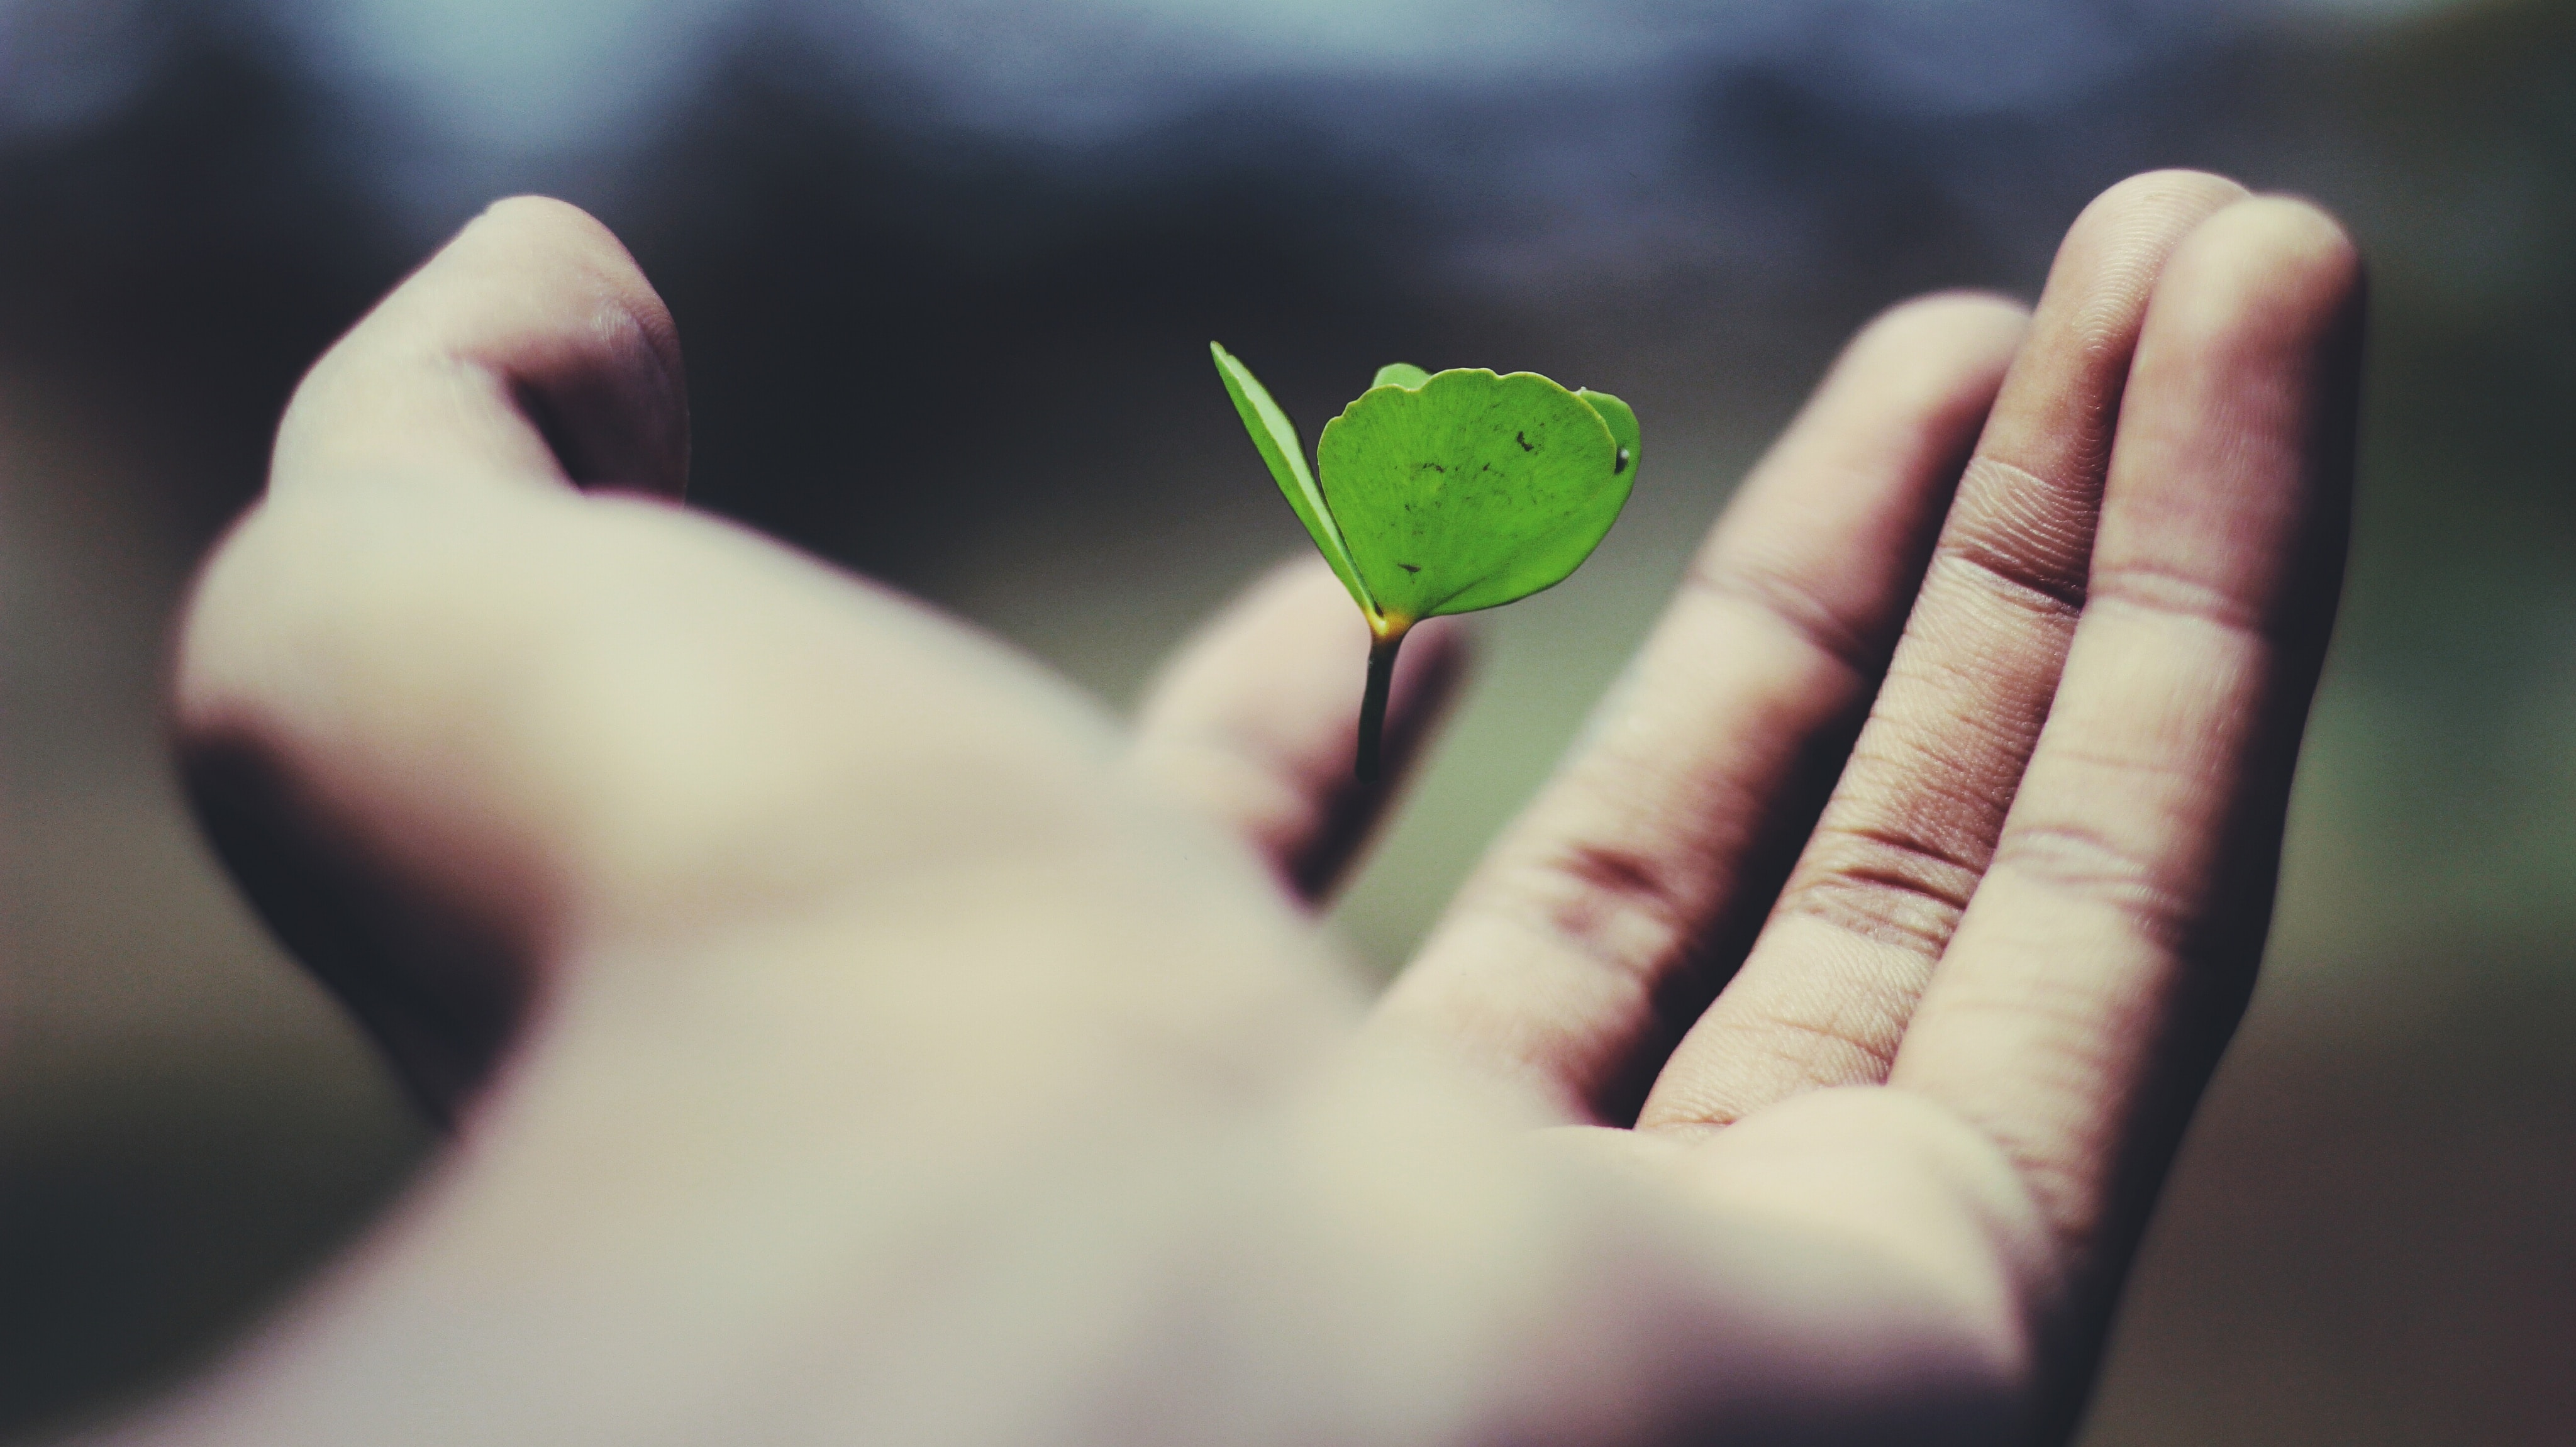 Stock photo of an outstretched hand with a small green leafy plant floating just above it